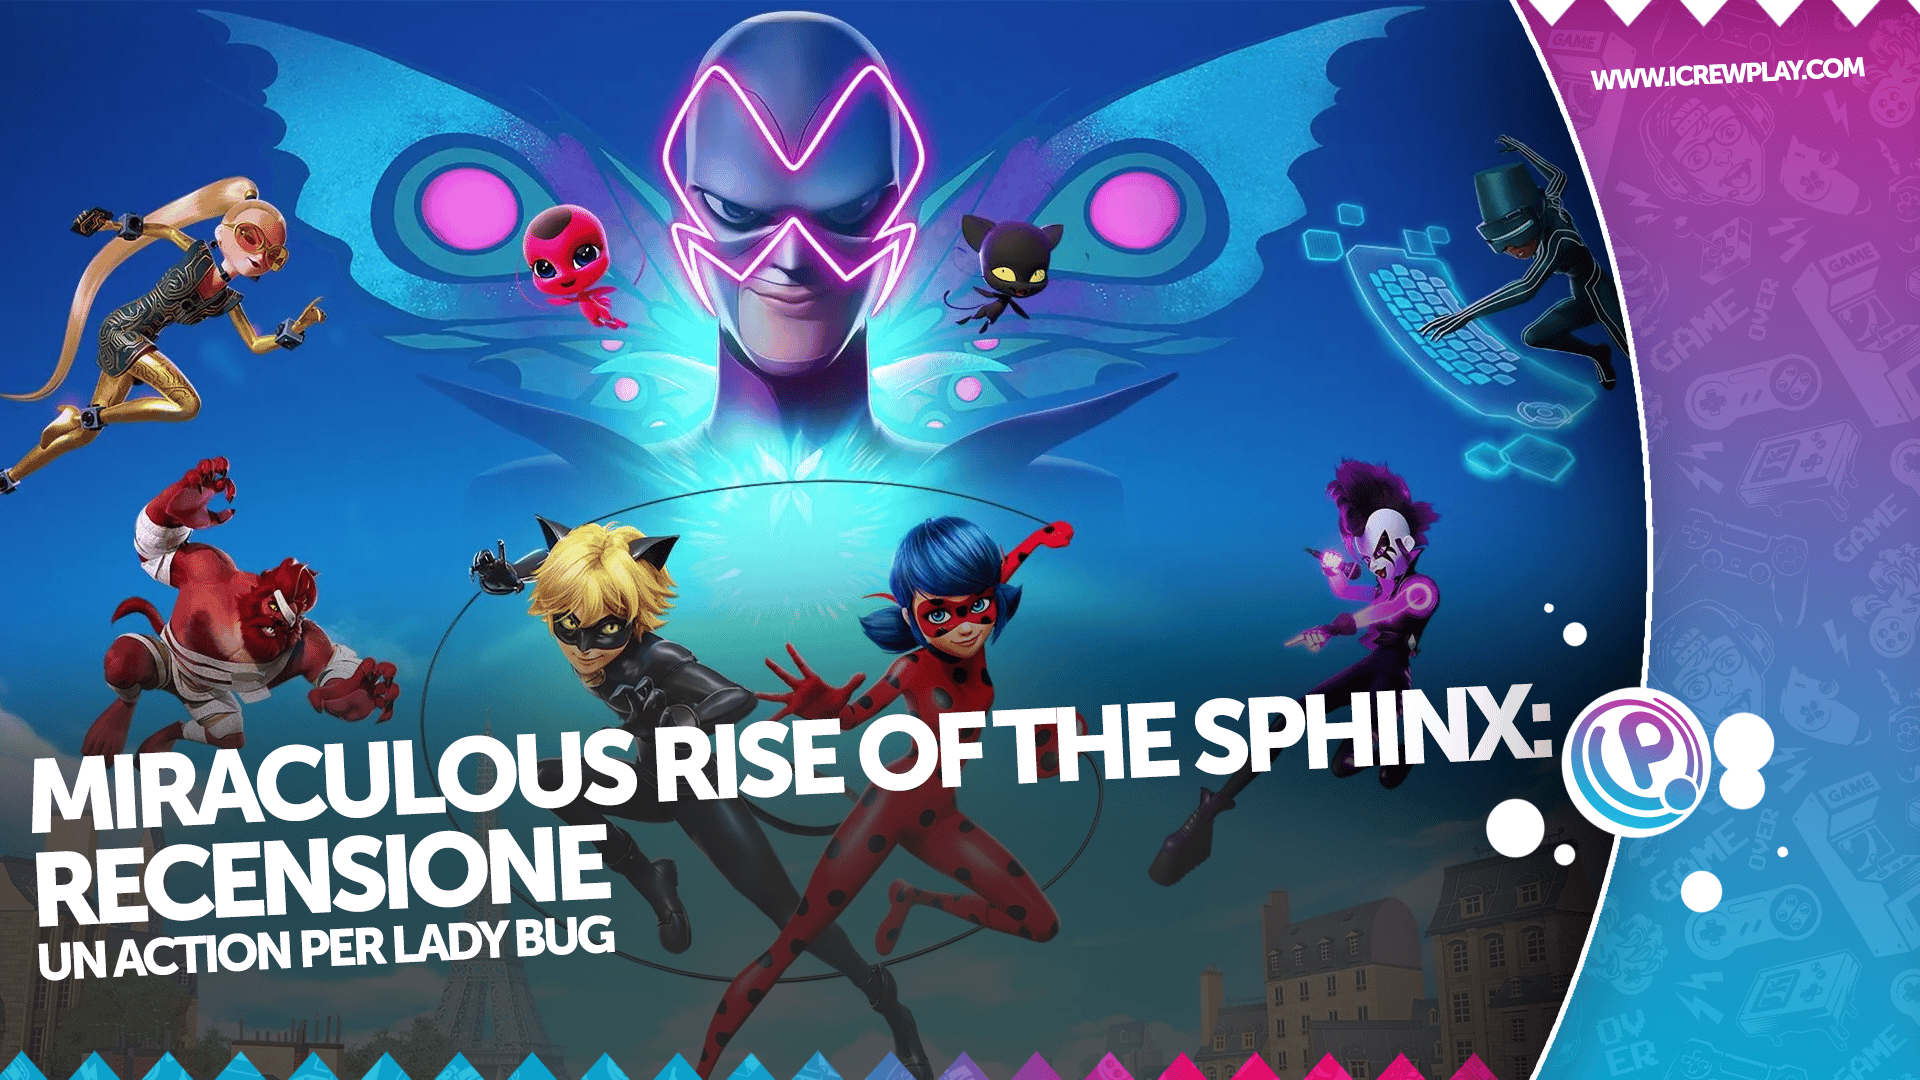 Miraculous rise of the sphinx: recensione per PlayStation 4 6